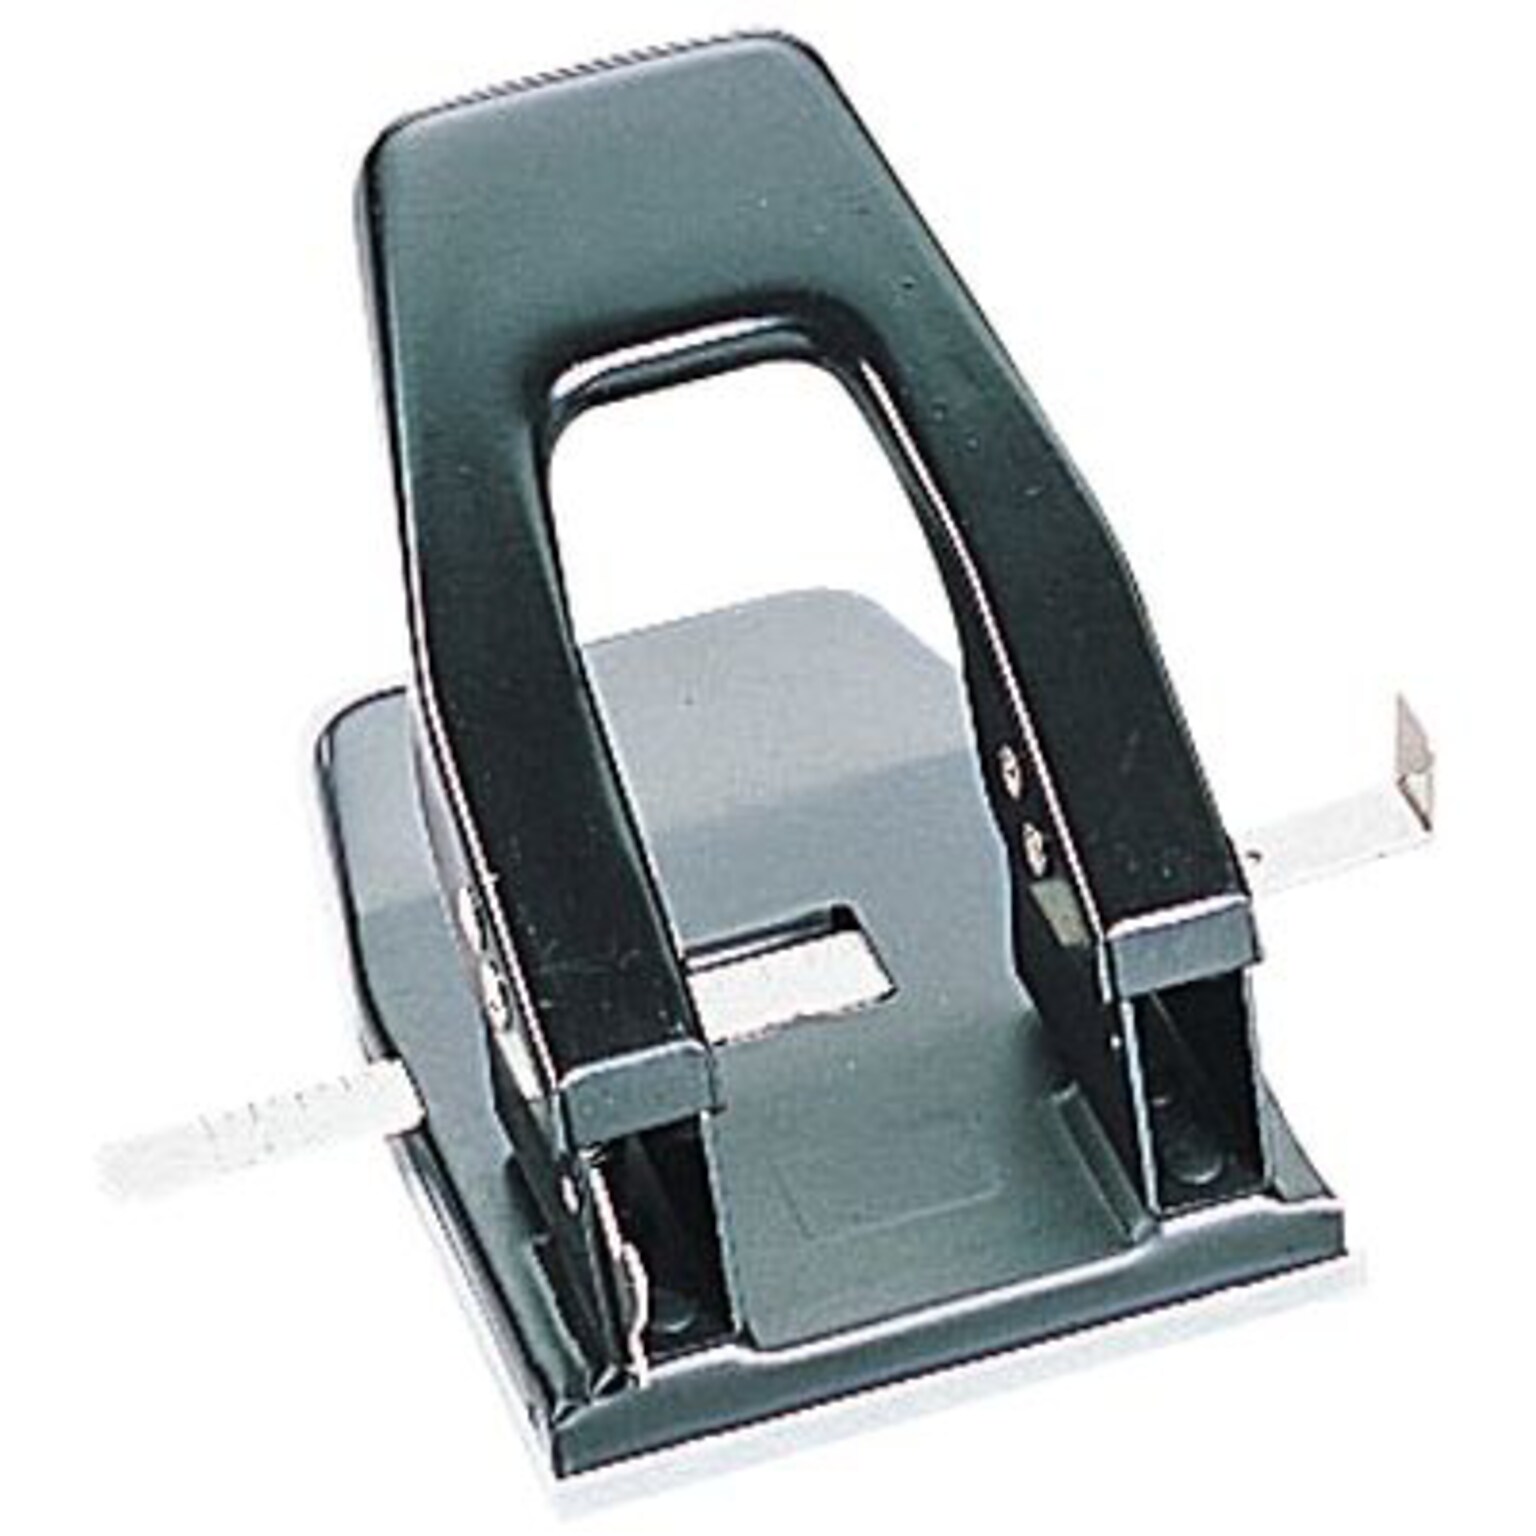 Quill Brand® 2-Hole Punch, 12 Sheet Capacity, Black (10354-QCC)